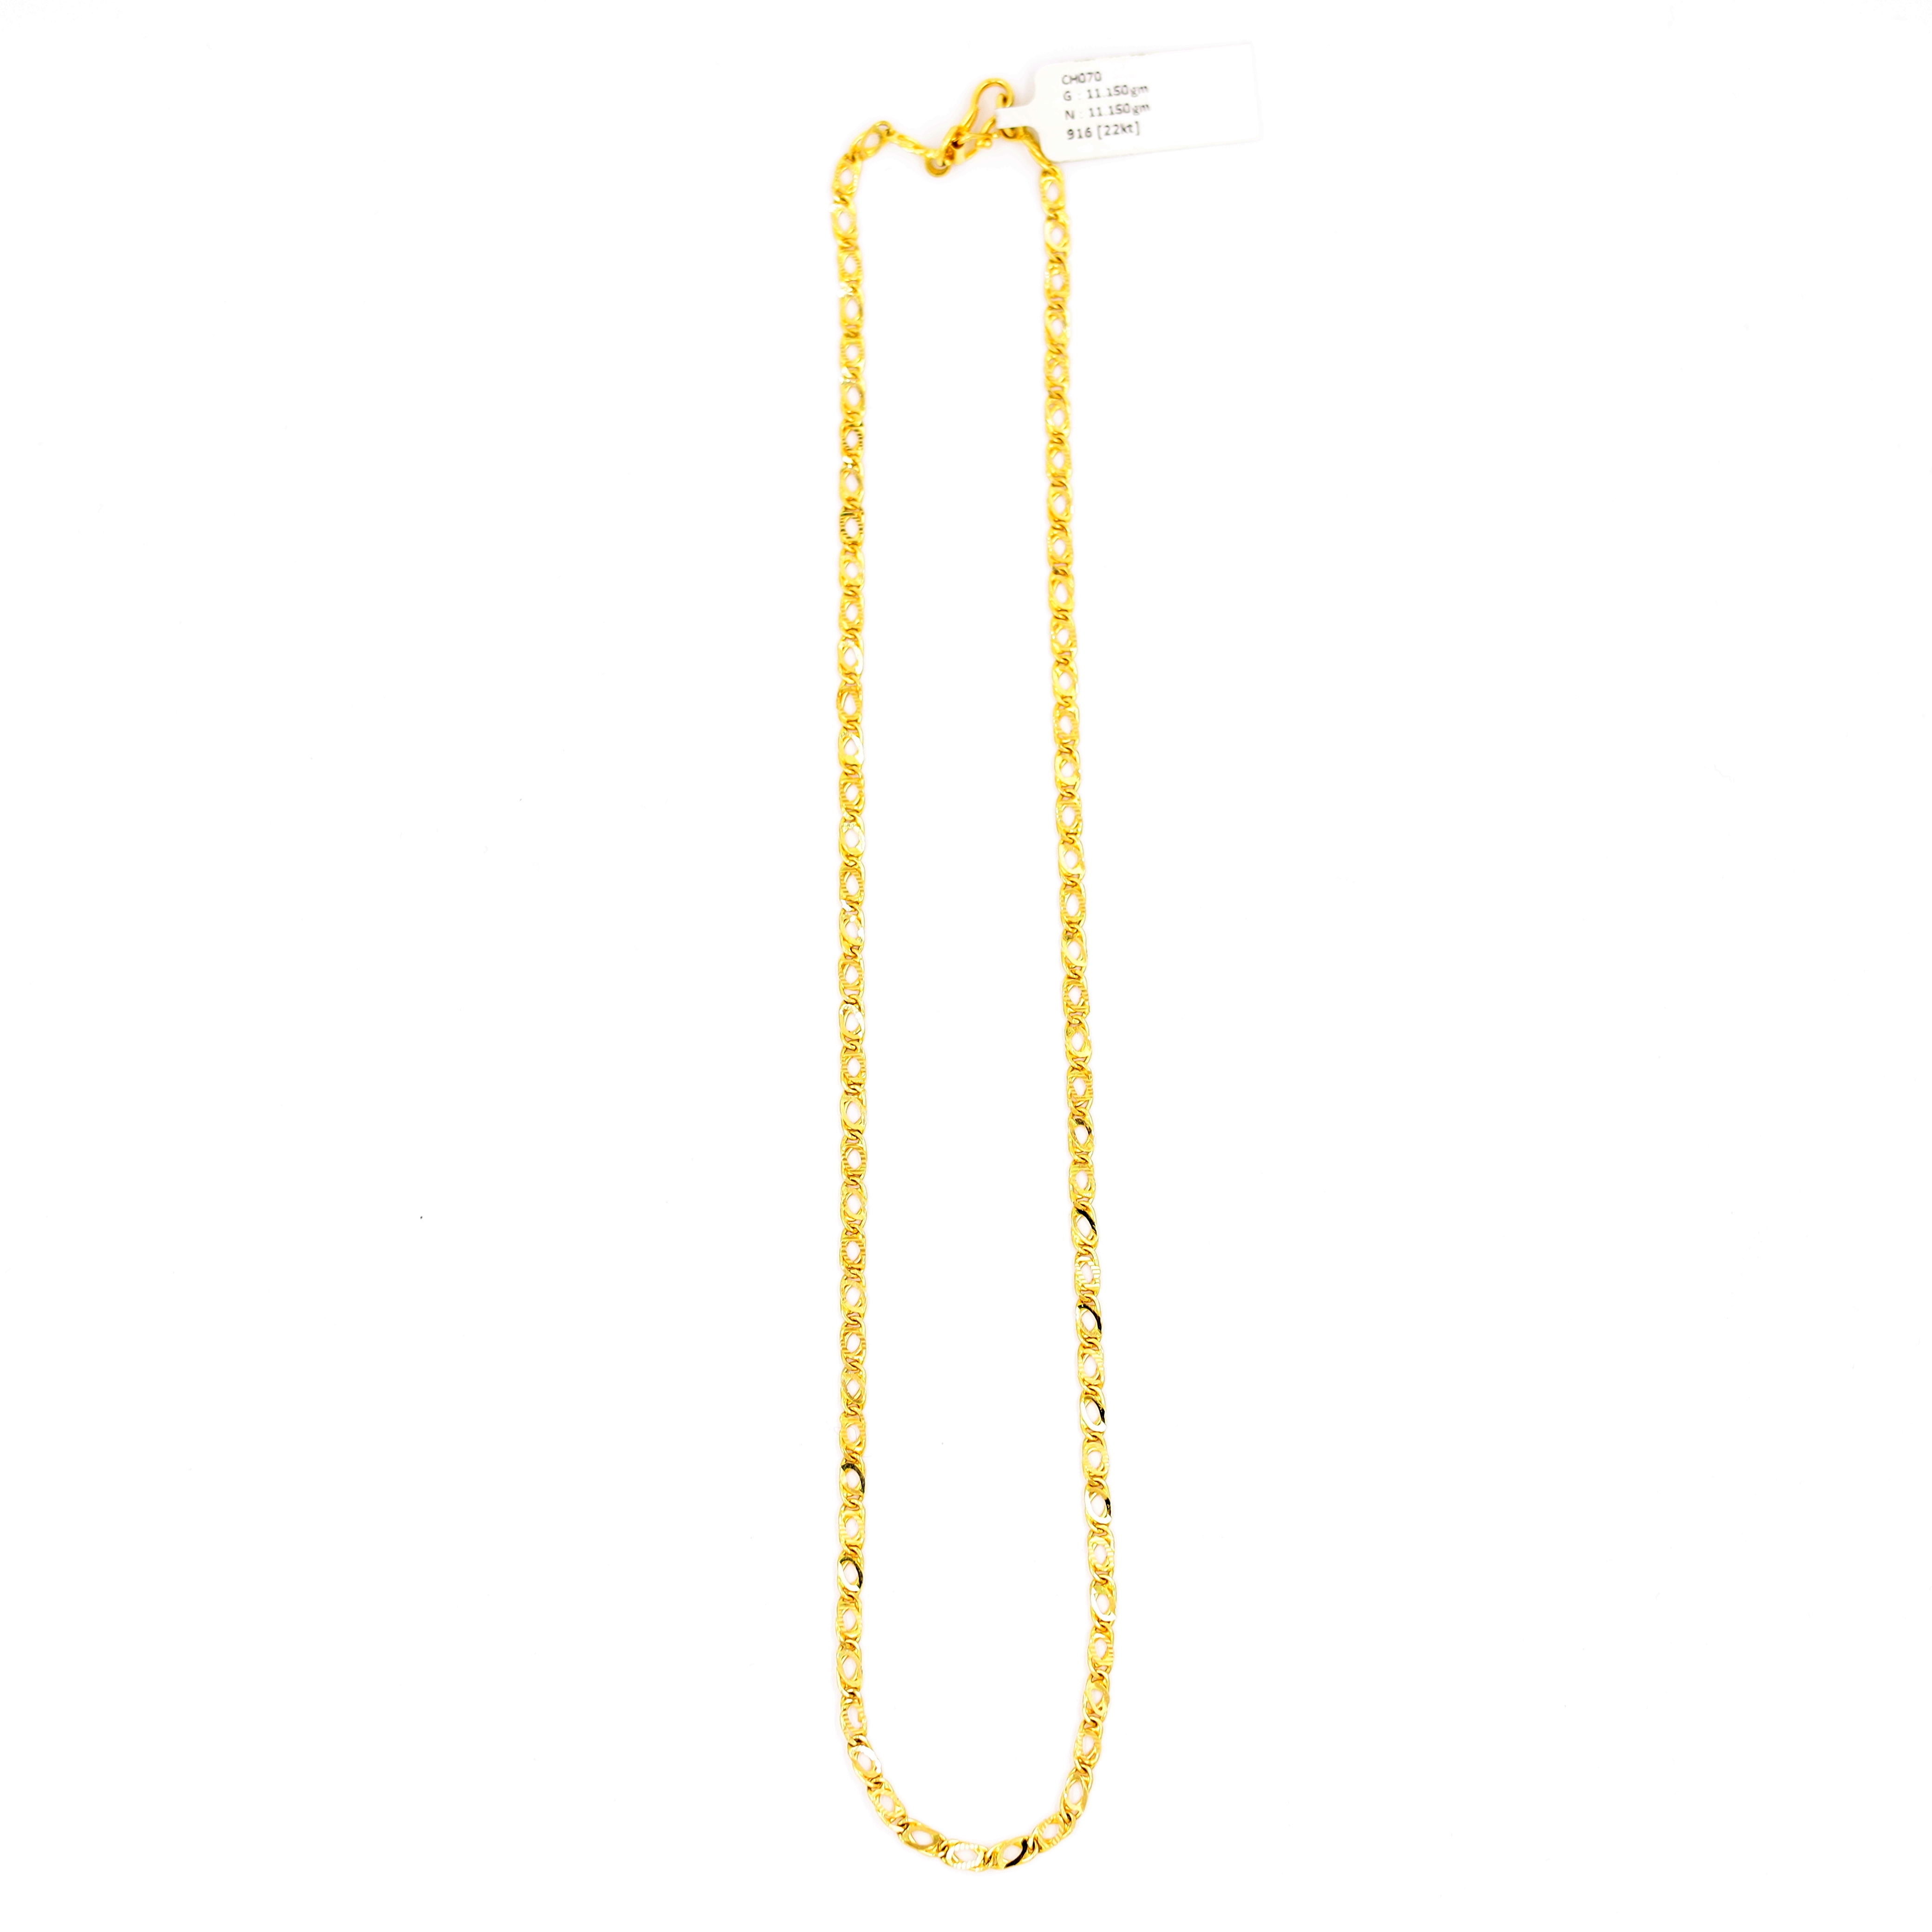 Magnificent Handmade Gold Chain For Men